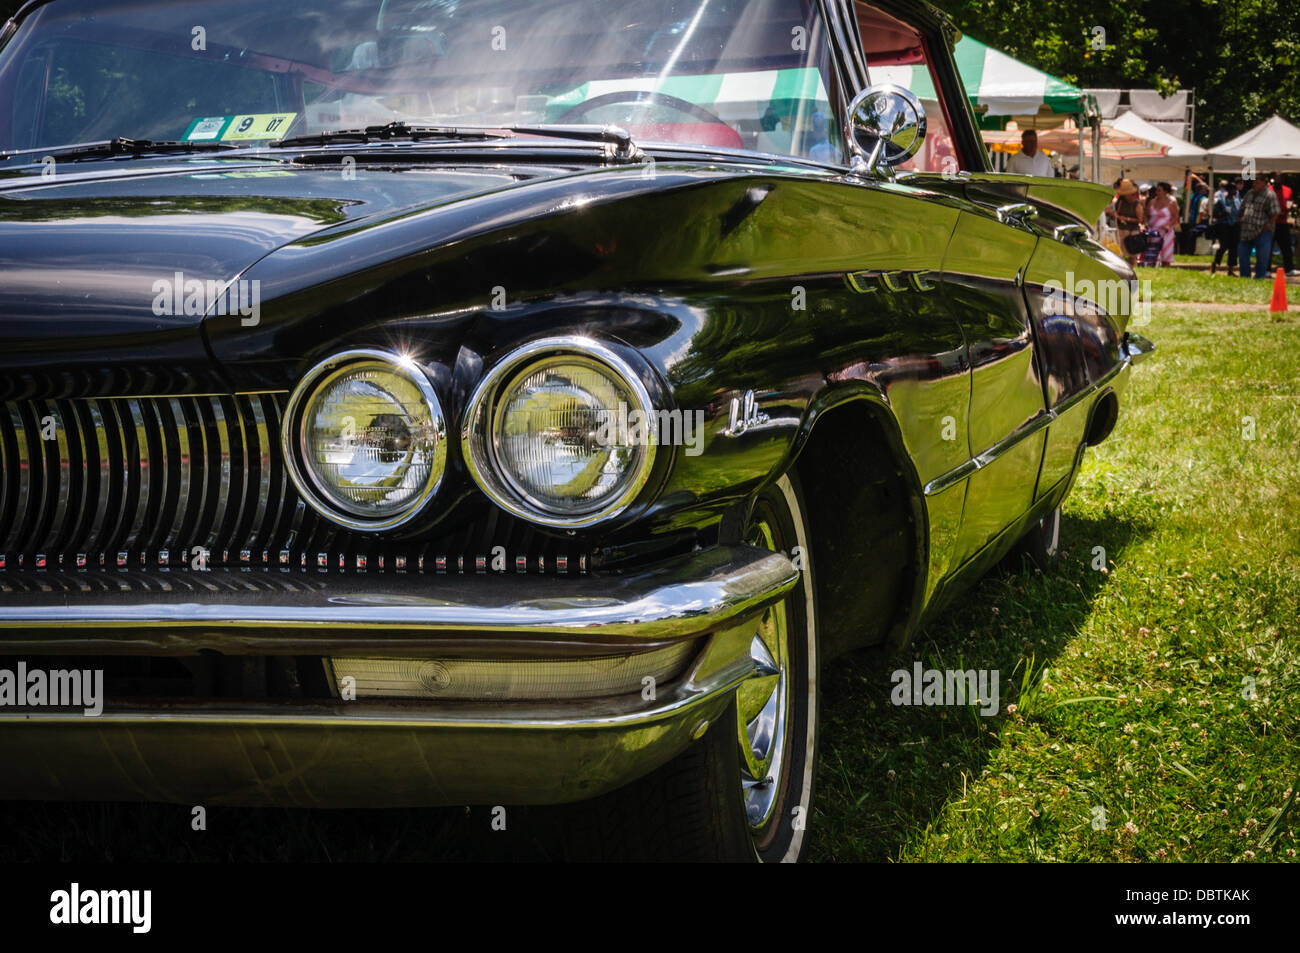 1960 Buick Invicta, Antique Car Show, Sully Historic Site, Chantilly, Virginia Stock Photo